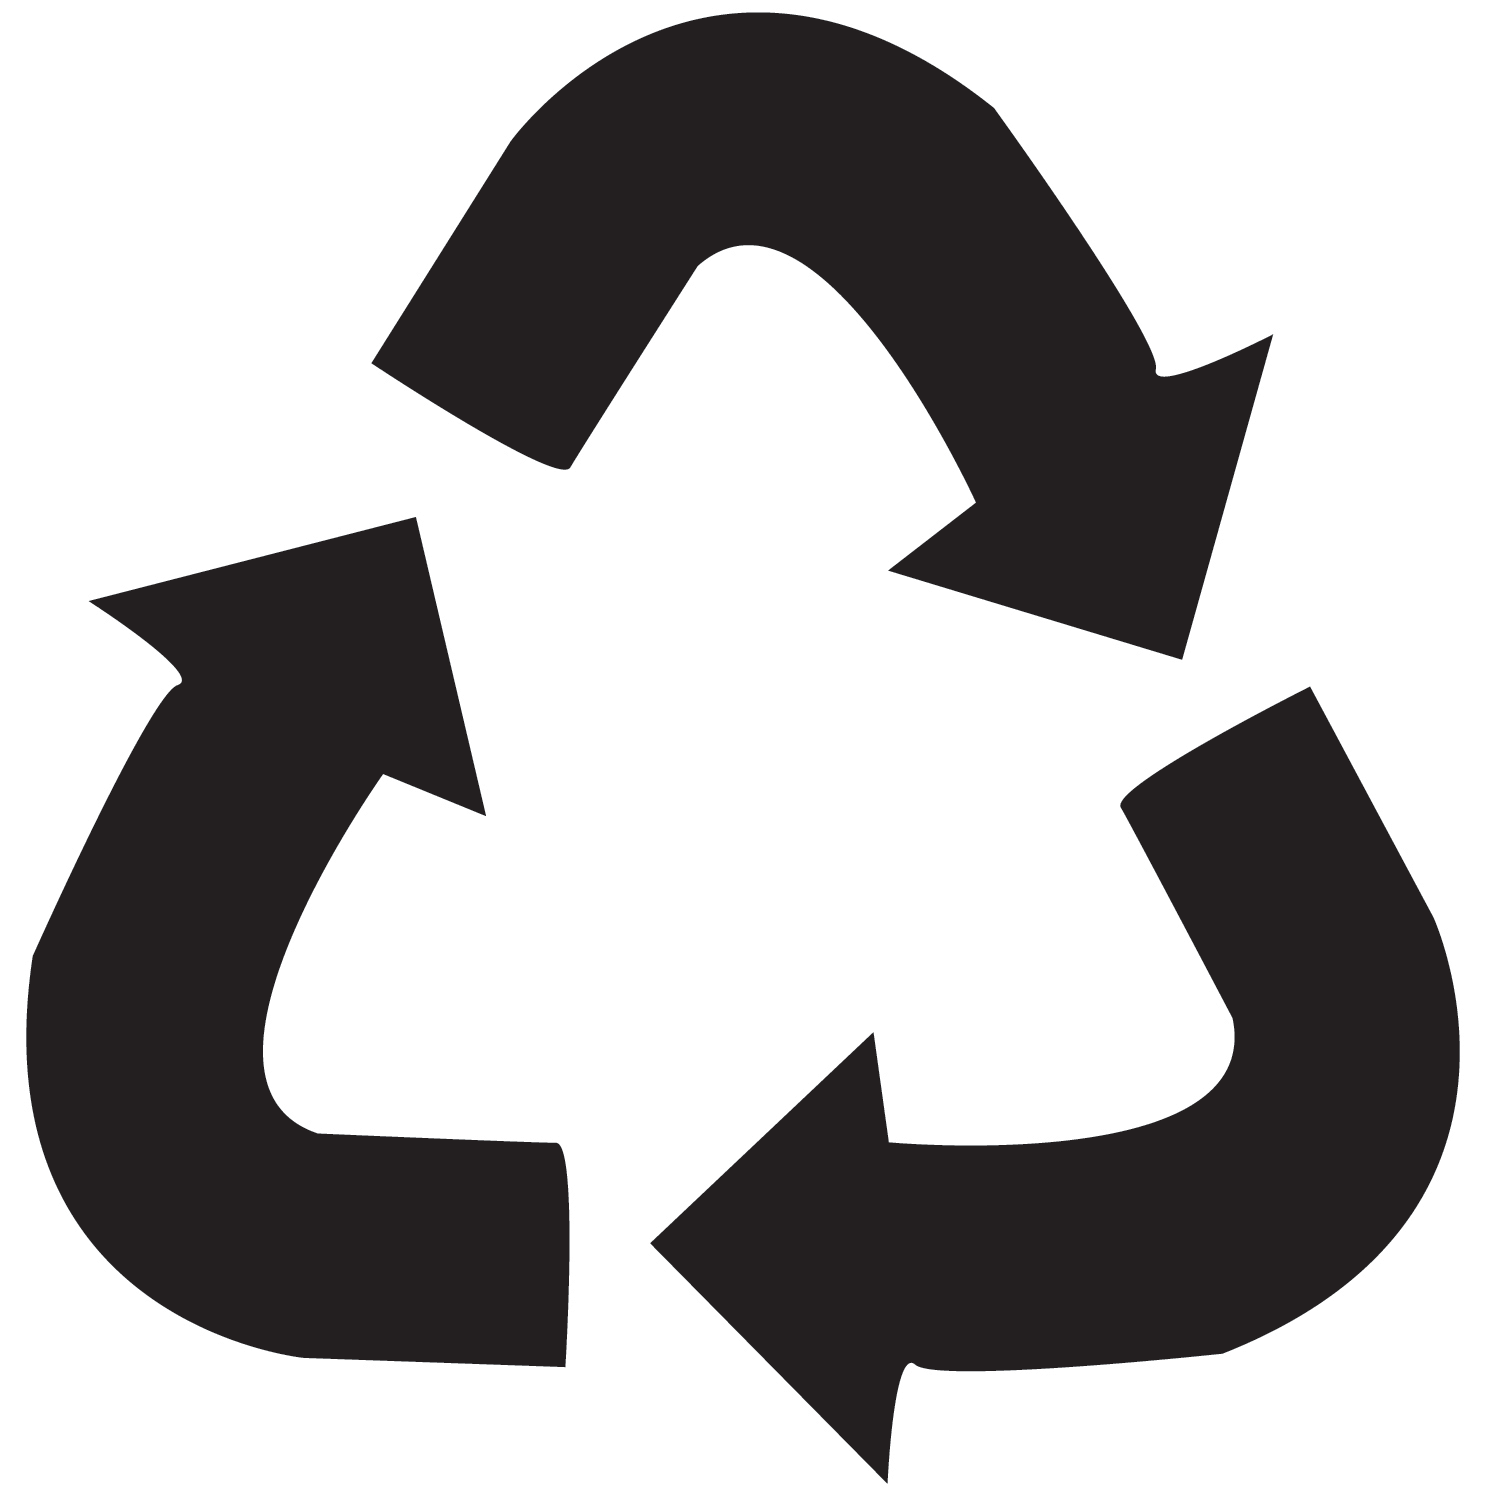 Free Recycling Icon, Download Free Clip Art, Free Clip Art